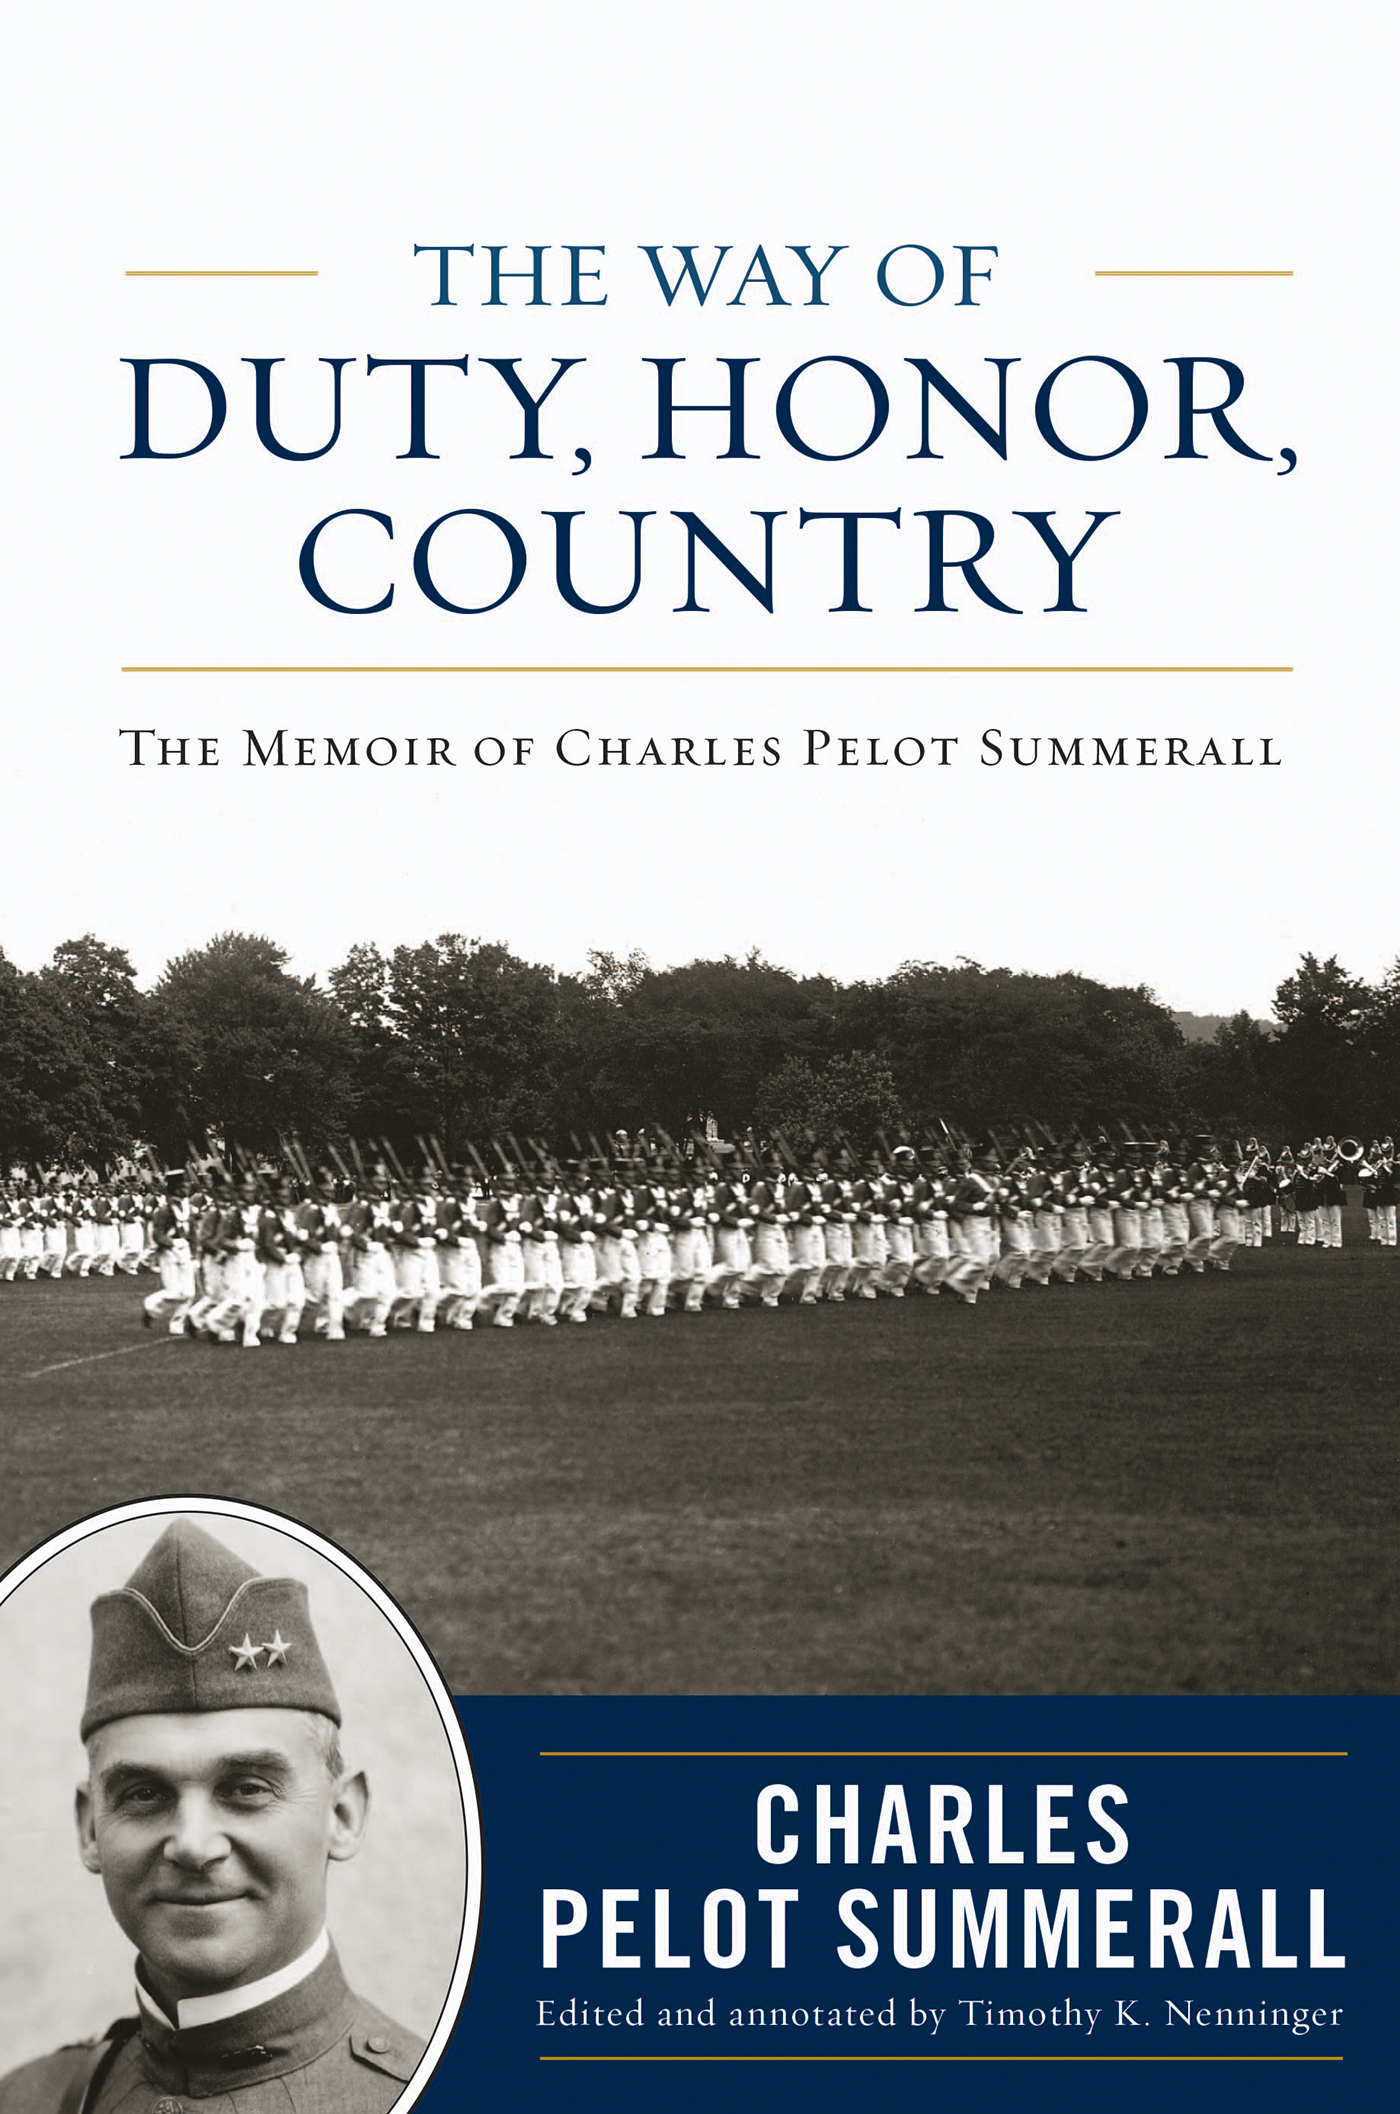 The Way of Duty, Honor, Country